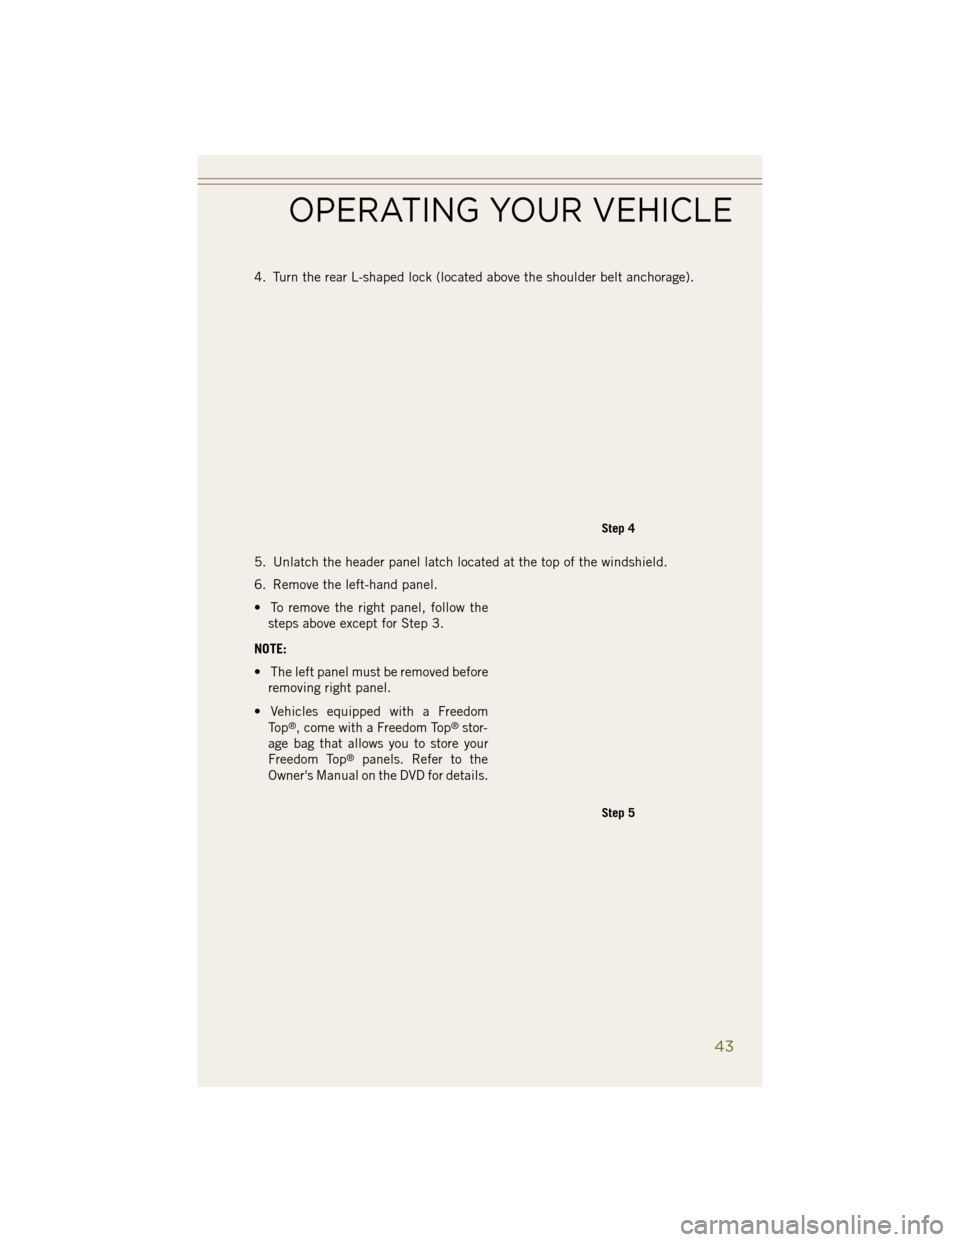 JEEP WRANGLER 2014 JK / 3.G Service Manual 4. Turn the rear L-shaped lock (located above the shoulder belt anchorage).
5. Unlatch the header panel latch located at the top of the windshield.
6. Remove the left-hand panel.
• To remove the rig